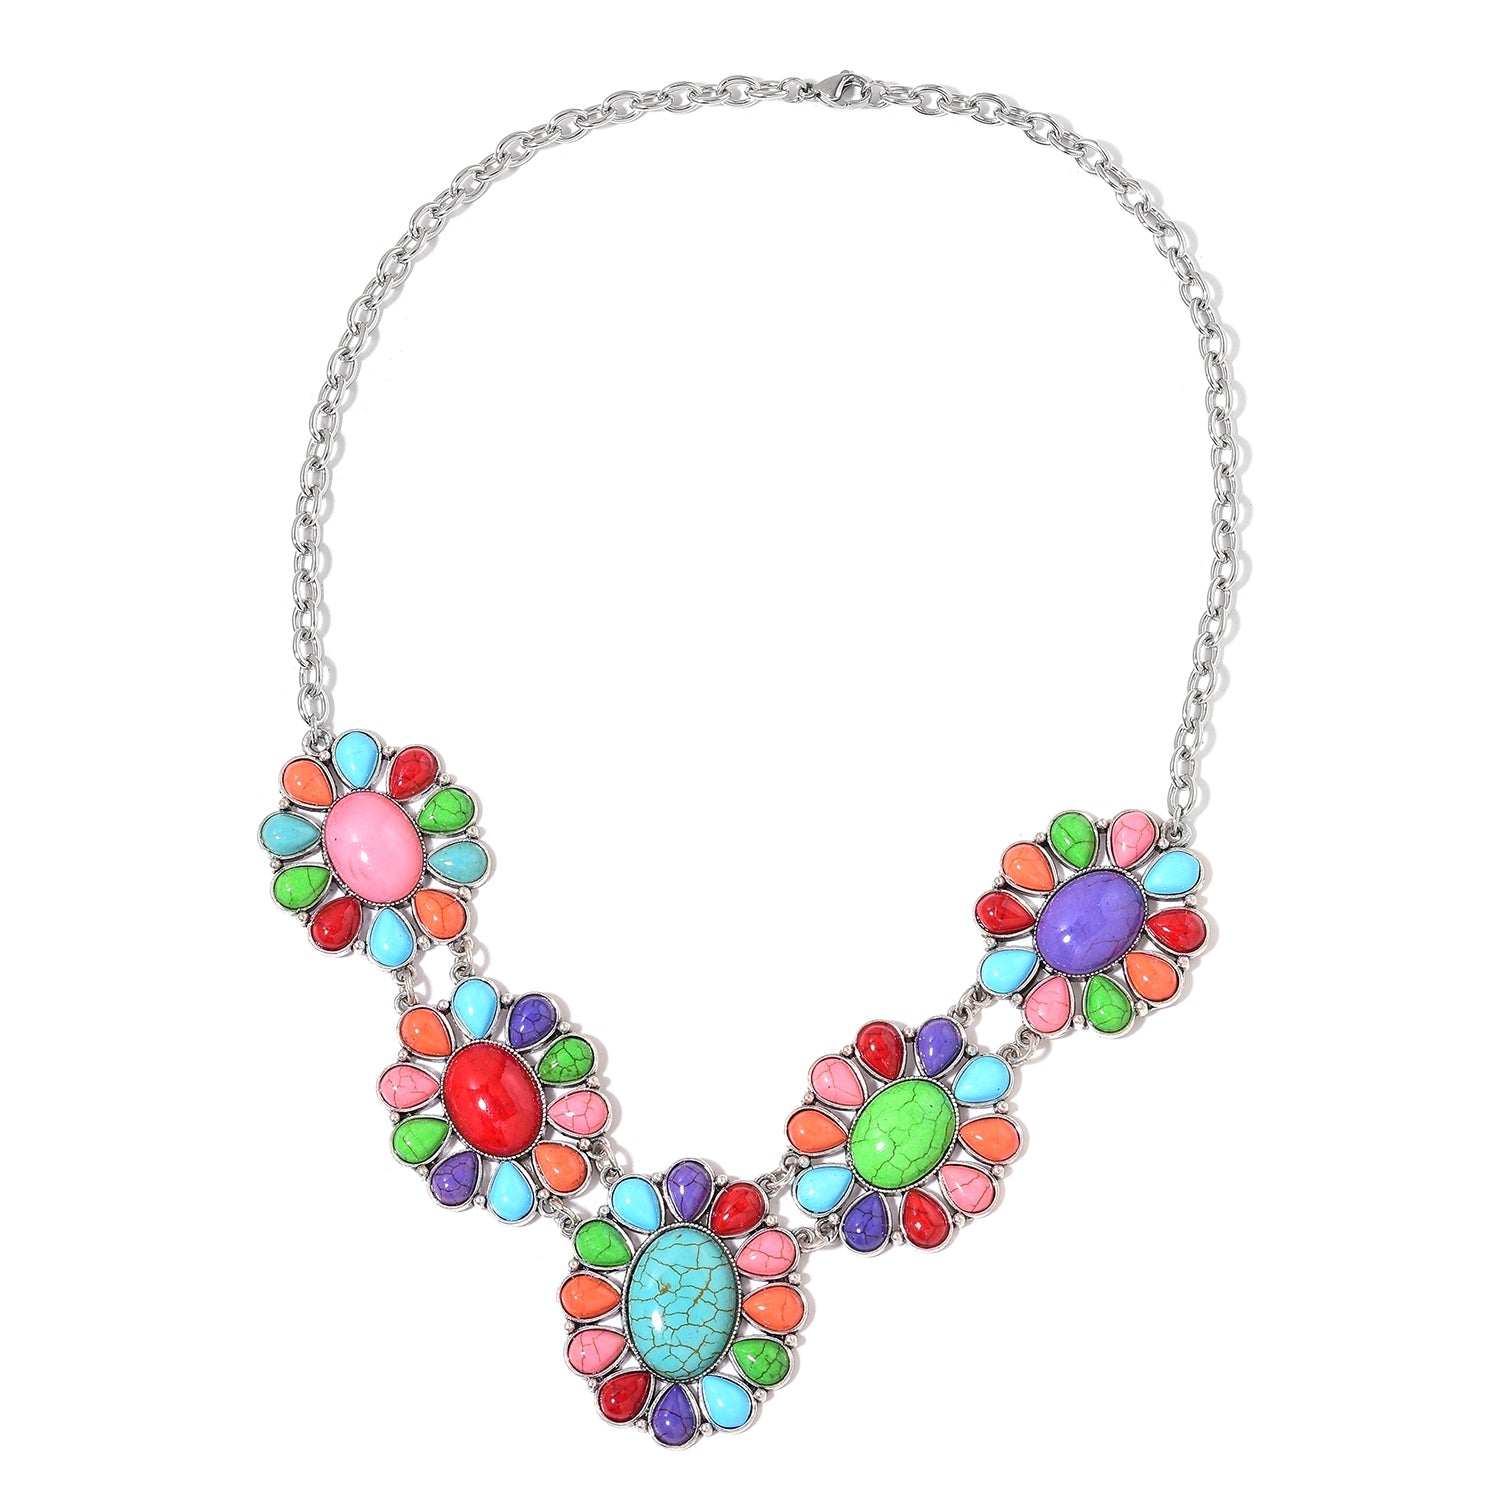 Multi-Color Garland of Daisy Flowers Howlite Stainless-Steel Earrings and Bib Style Necklace TGW 264.00 cts - Houzz of DVA Boutique